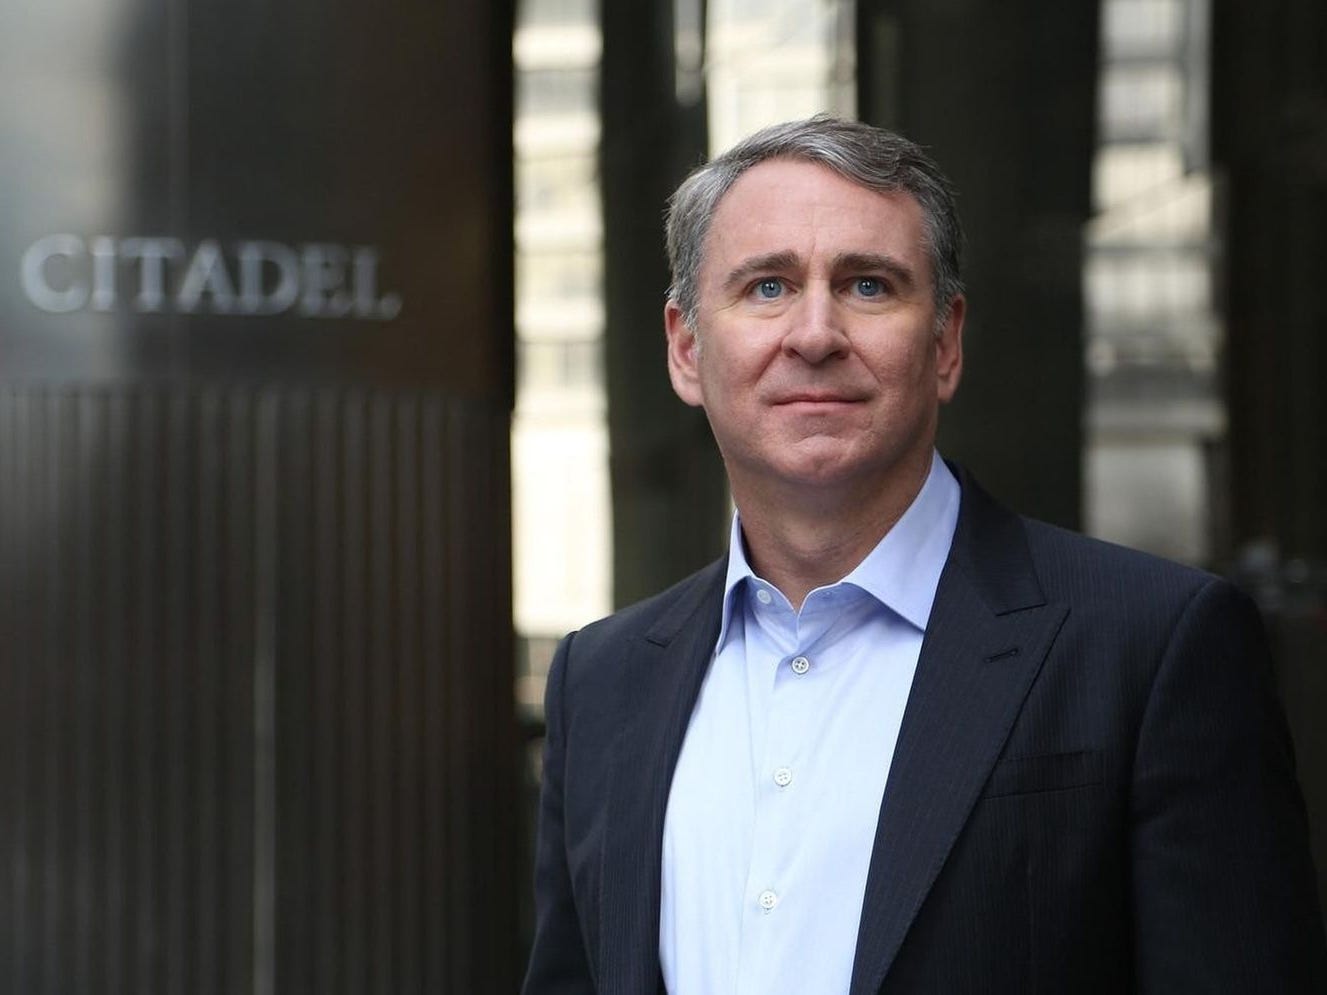 microsoft, citadel's ken griffin wants to build a massive nyc skyscraper that the city hopes will lure more workers back to the office